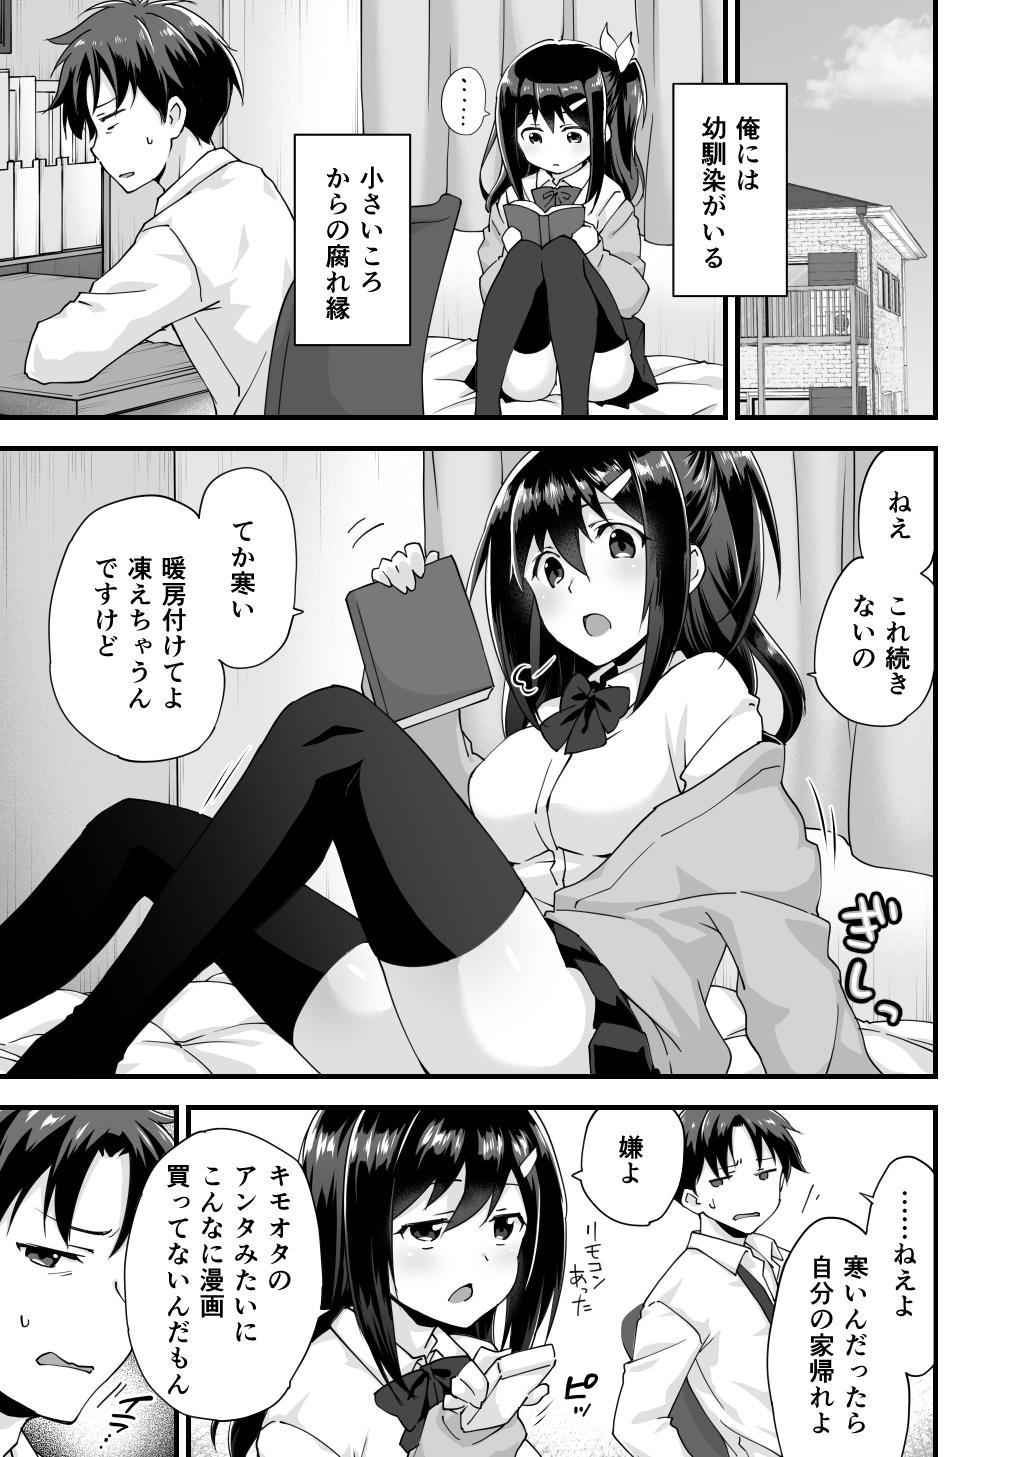 Doctor 幼馴染と喧嘩エッチ～素直になれない生意気彼女～ - Original Cameltoe - Page 3